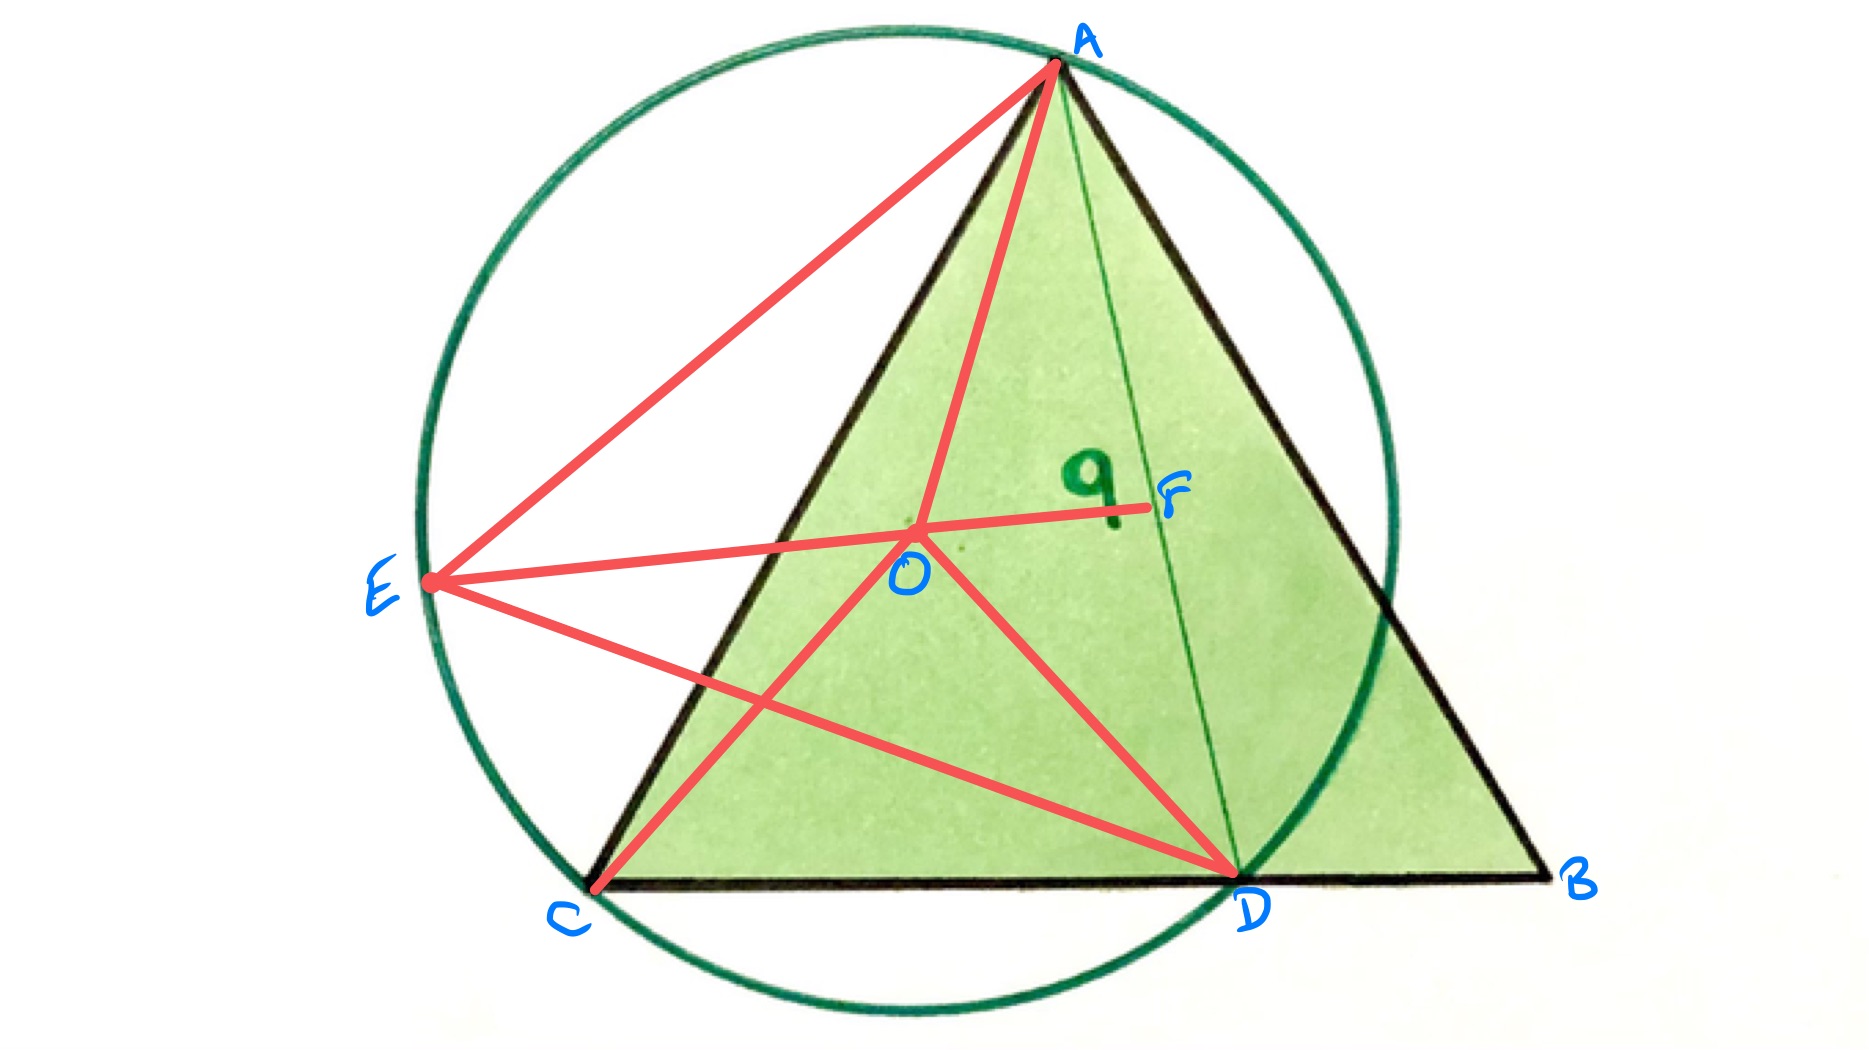 Triangle over a circle labelled